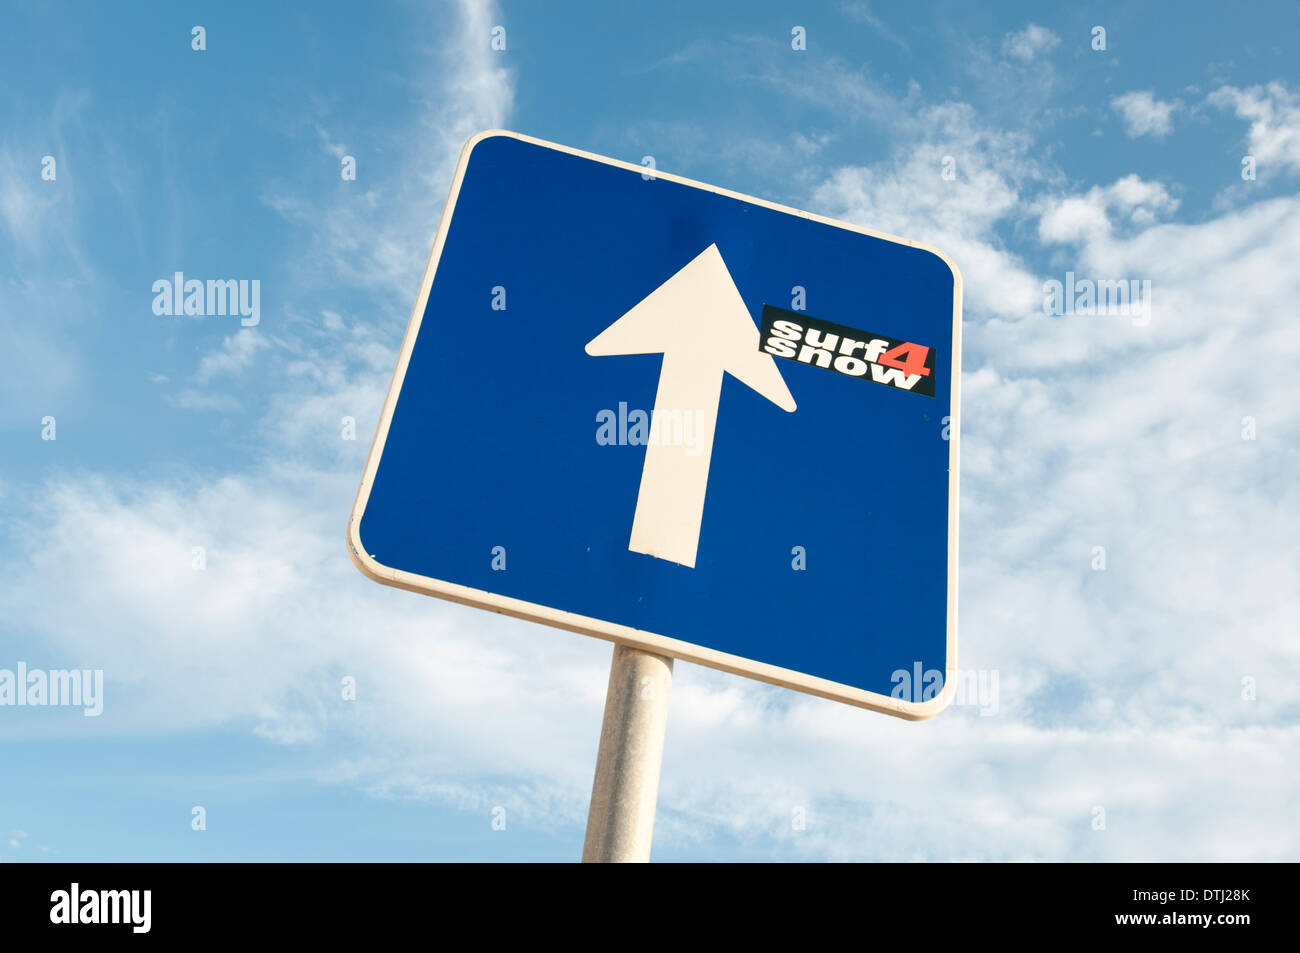 straight on direction road sign Stock Photo